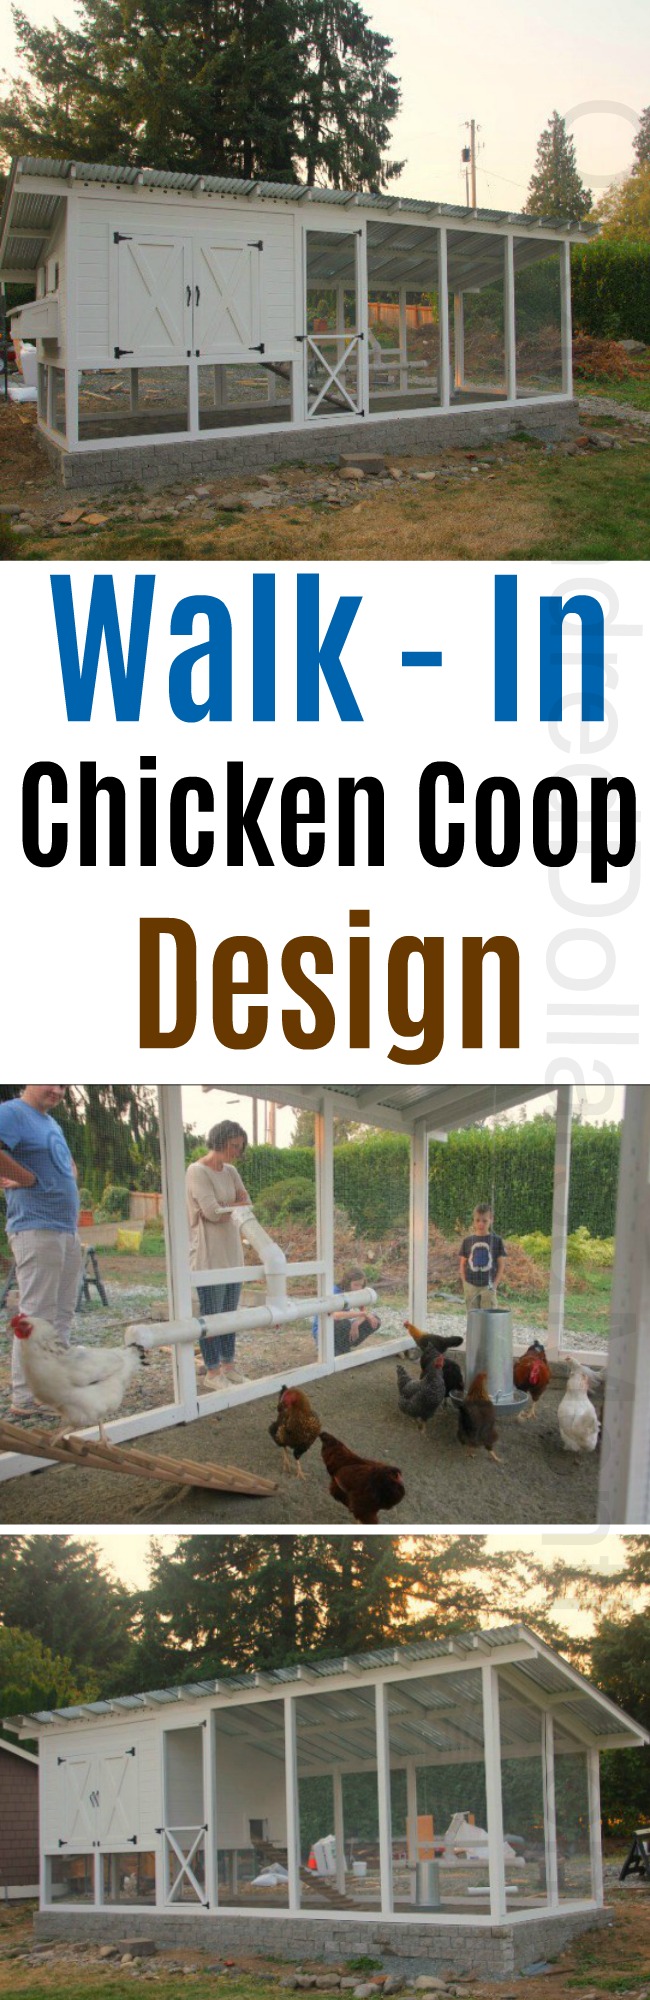 Mavis Mail – Mama Cook From Snohomish Sends in Her Walk in Chicken Coop Photos